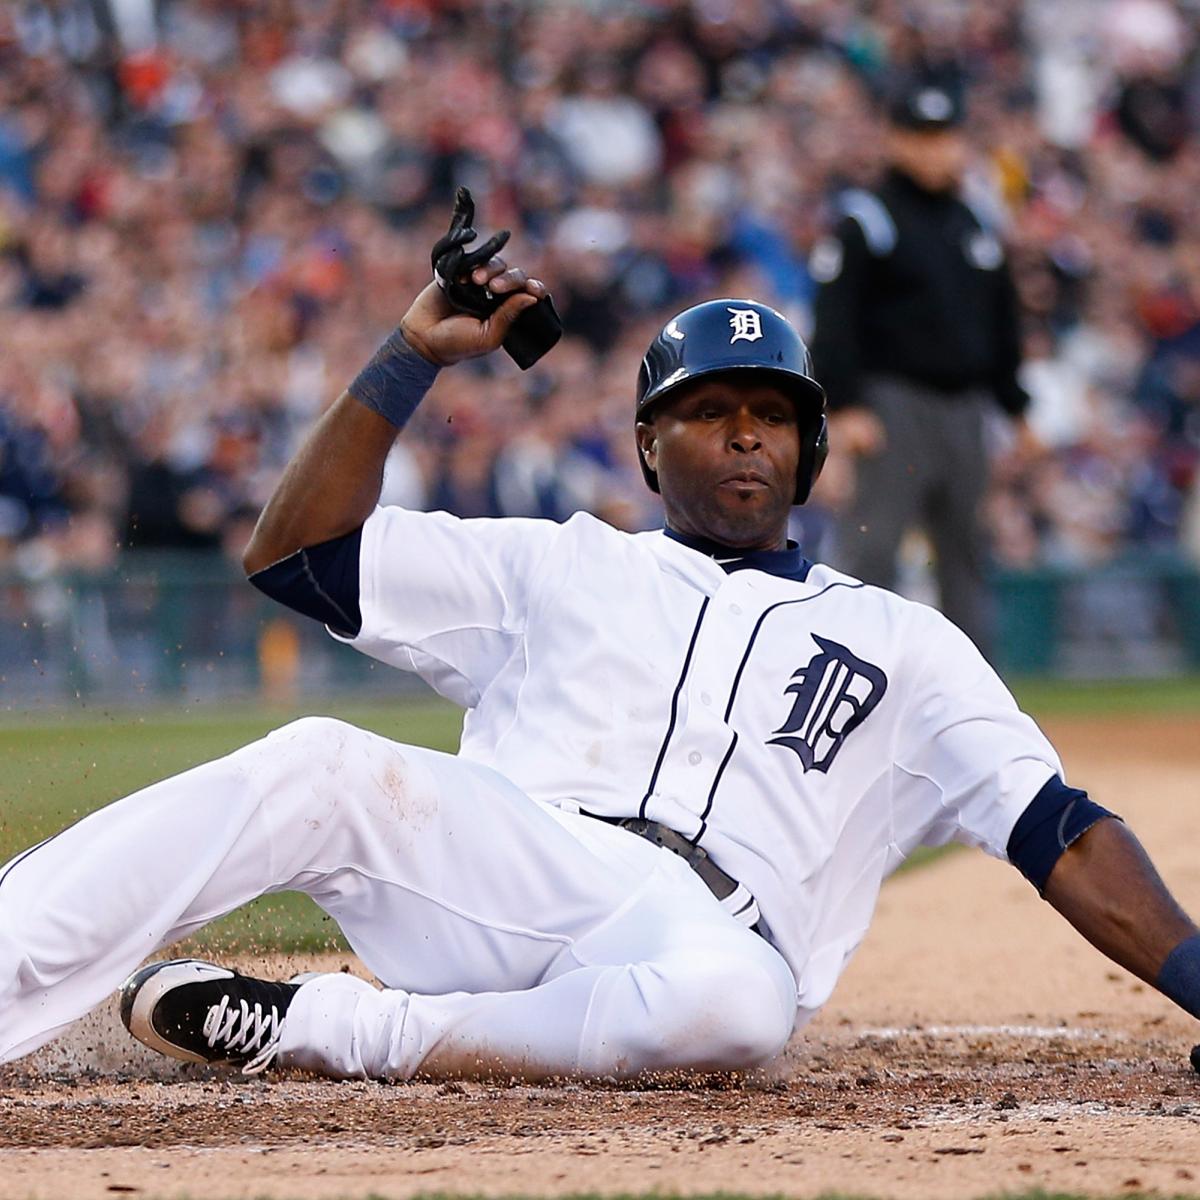 Detroit Tigers' Torii Hunter eager to build chemistry with